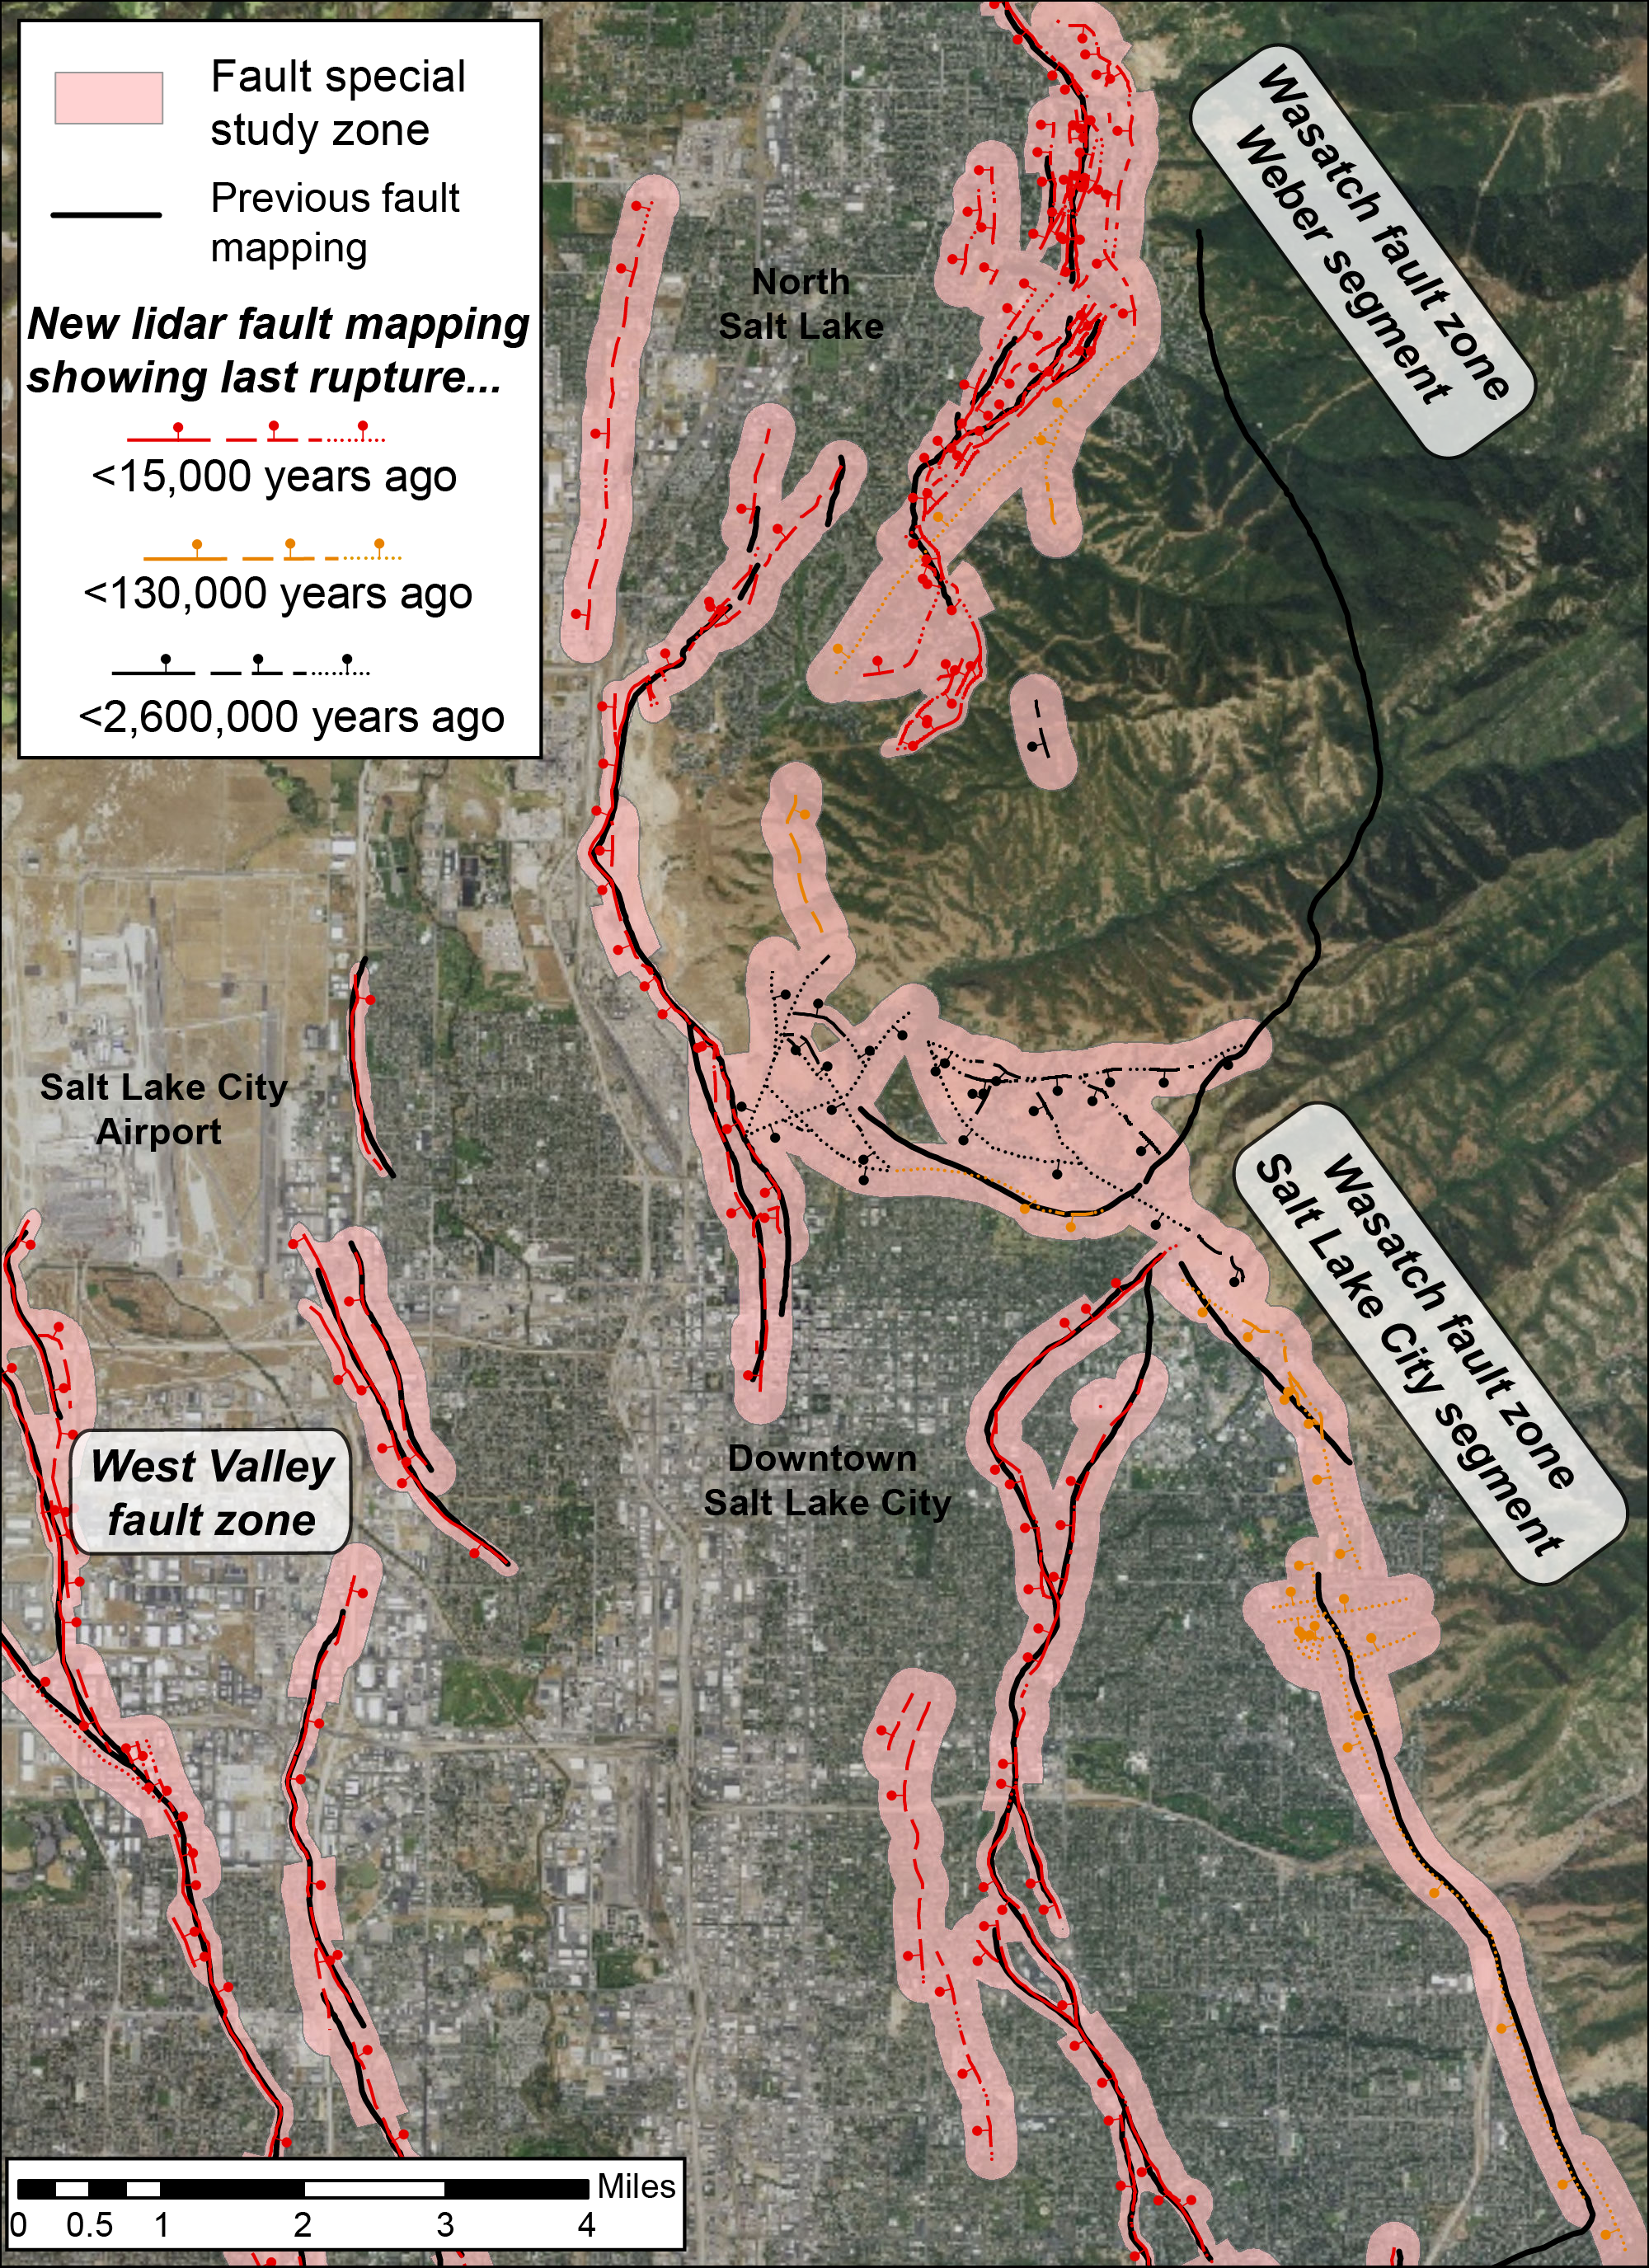 Wasatch fault zone mappings